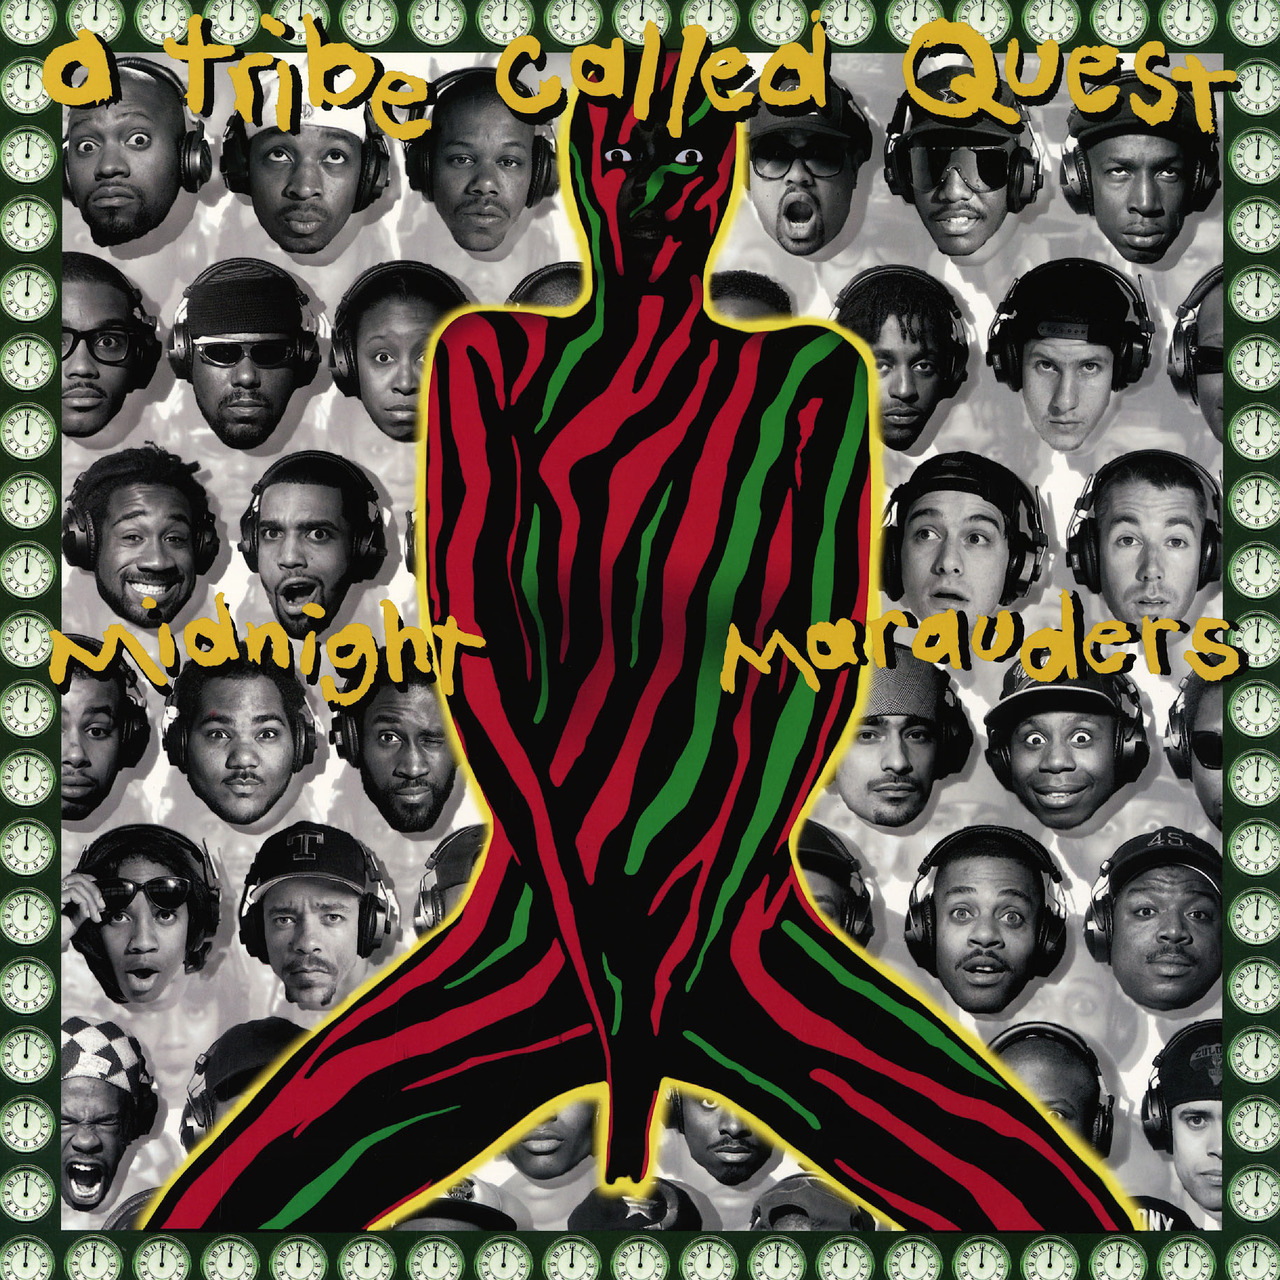 Today in Hip-Hop History: A Tribe Called Quest Dropped Their ‘Midnight Marauders’ LP 27 Years Ago